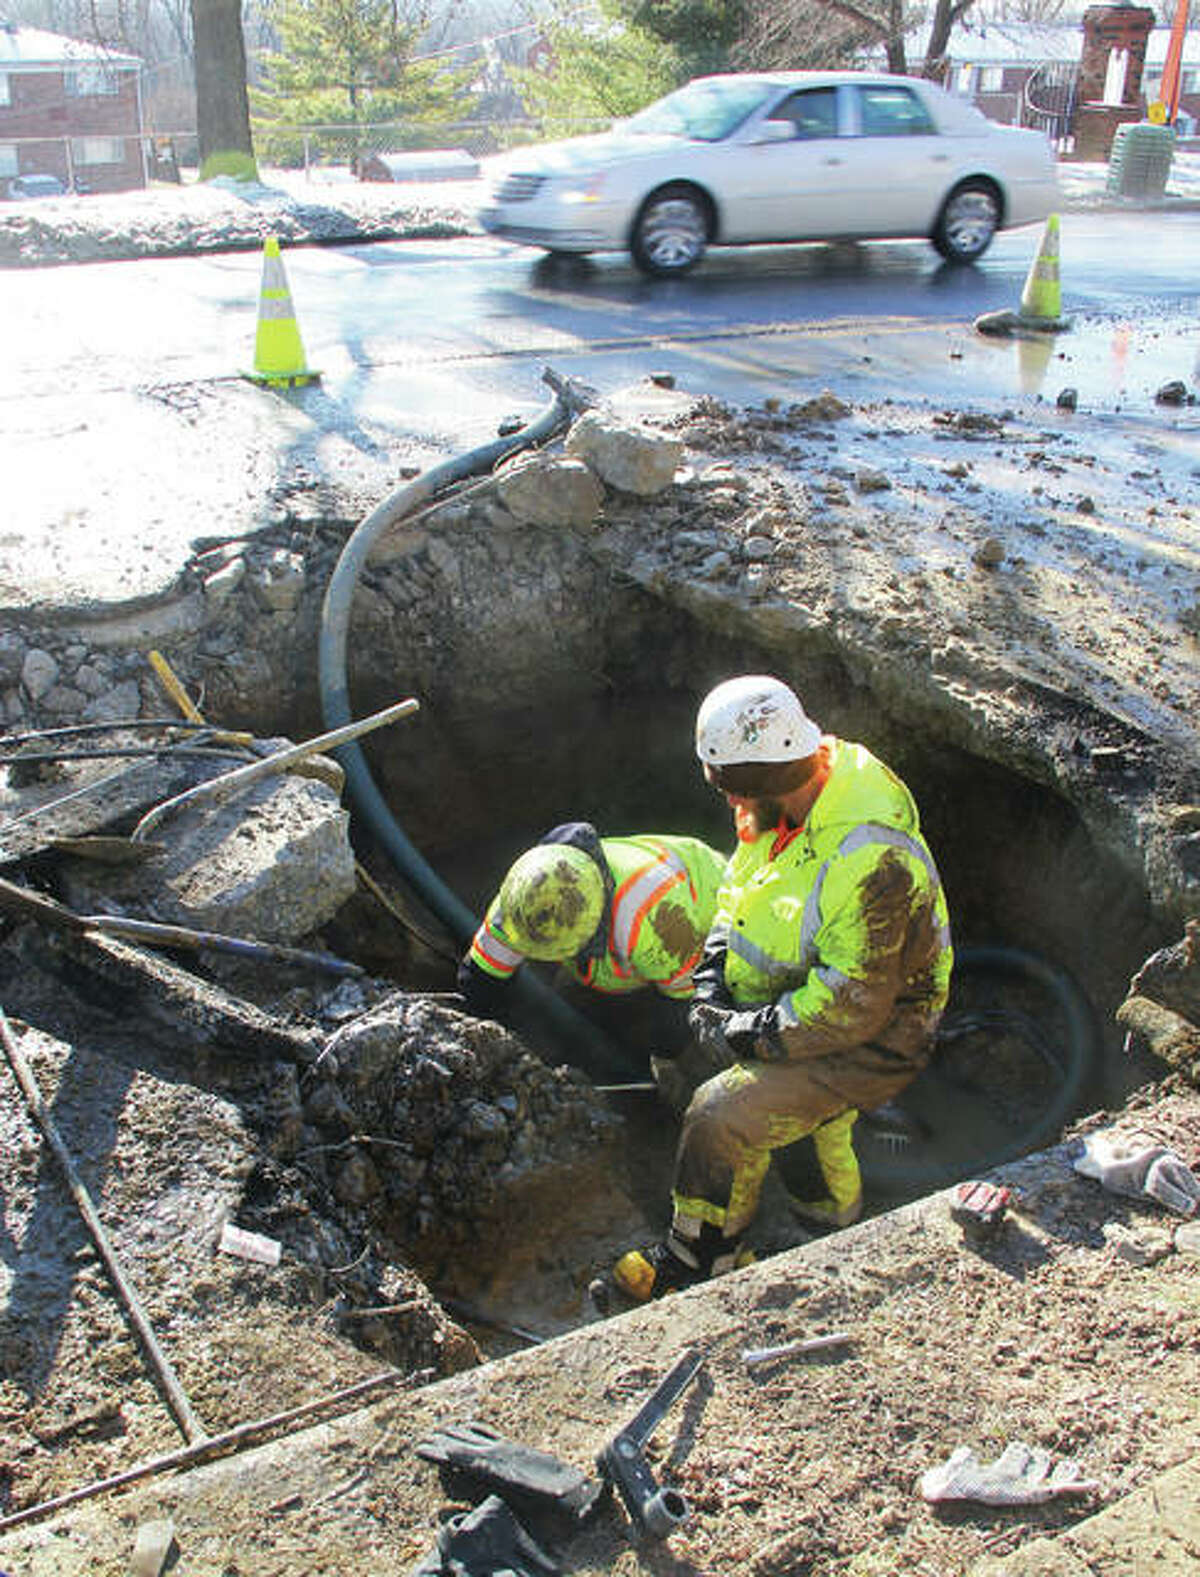 A car goes by as Illinois American Water workers Matt Knight, left, and Brett Becherer work on a water main break on Washington Avenue. Two large breaks were reported Tuesday night and Wednesday morning.